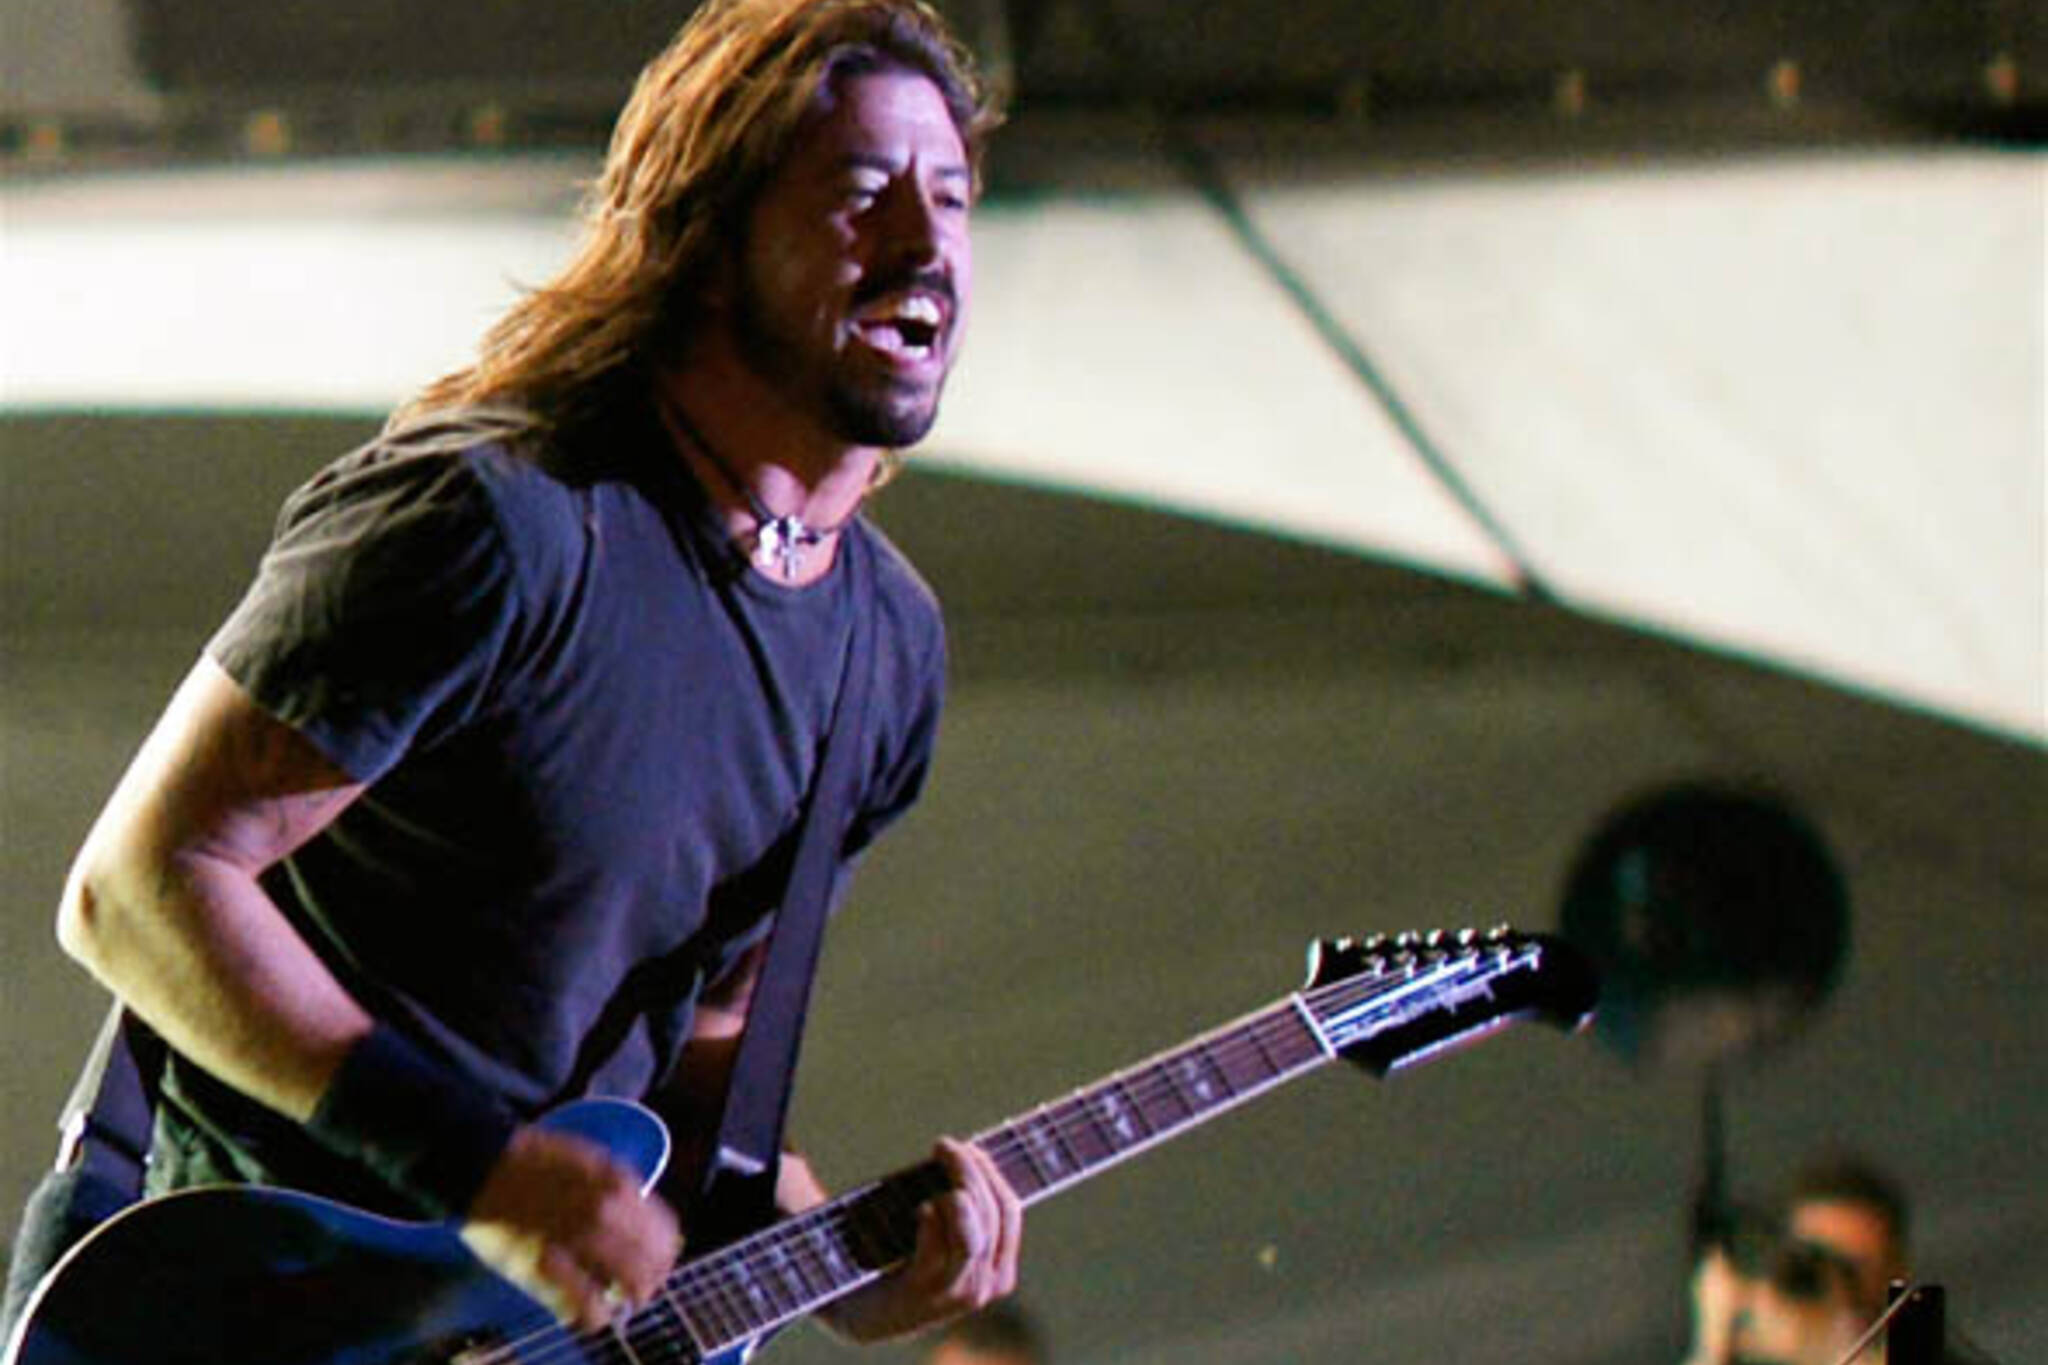 Dave Grohl of Foo Fighters at Virgin Music Festival in Toronto